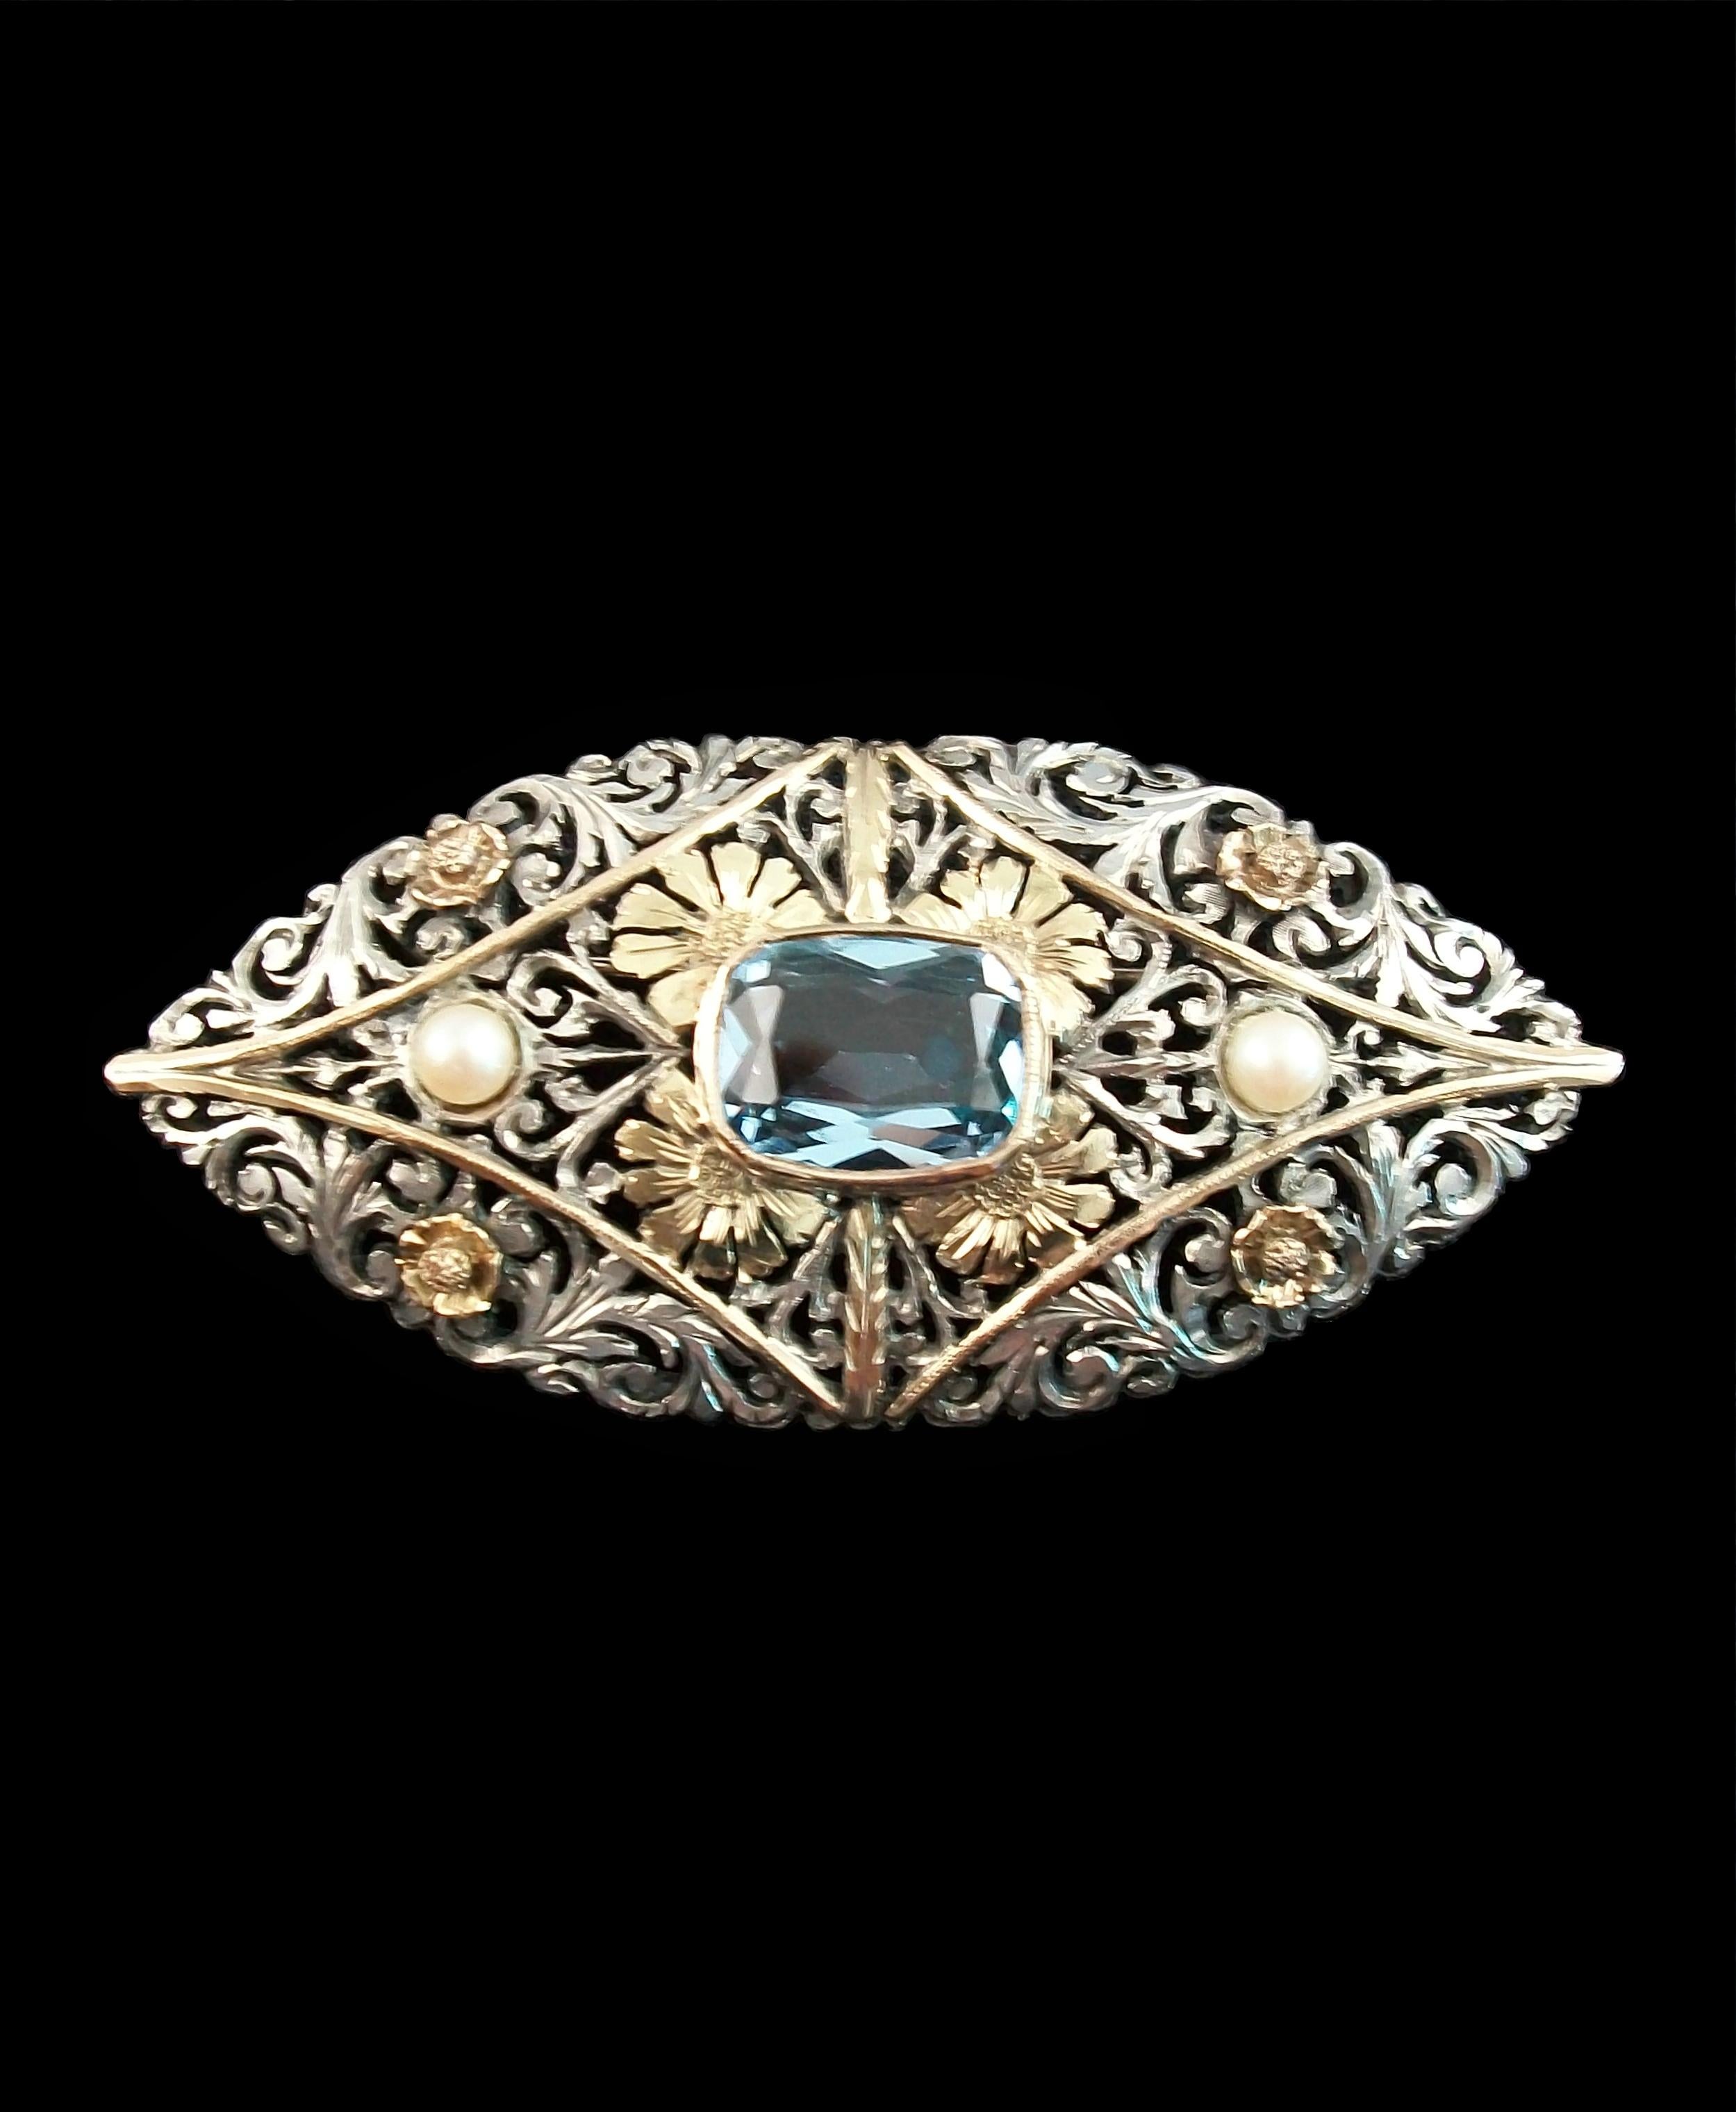 Art Nouveau Aquamarine & Pearl Brooch Set in Silver & Gold - France - Circa 1900 For Sale 1